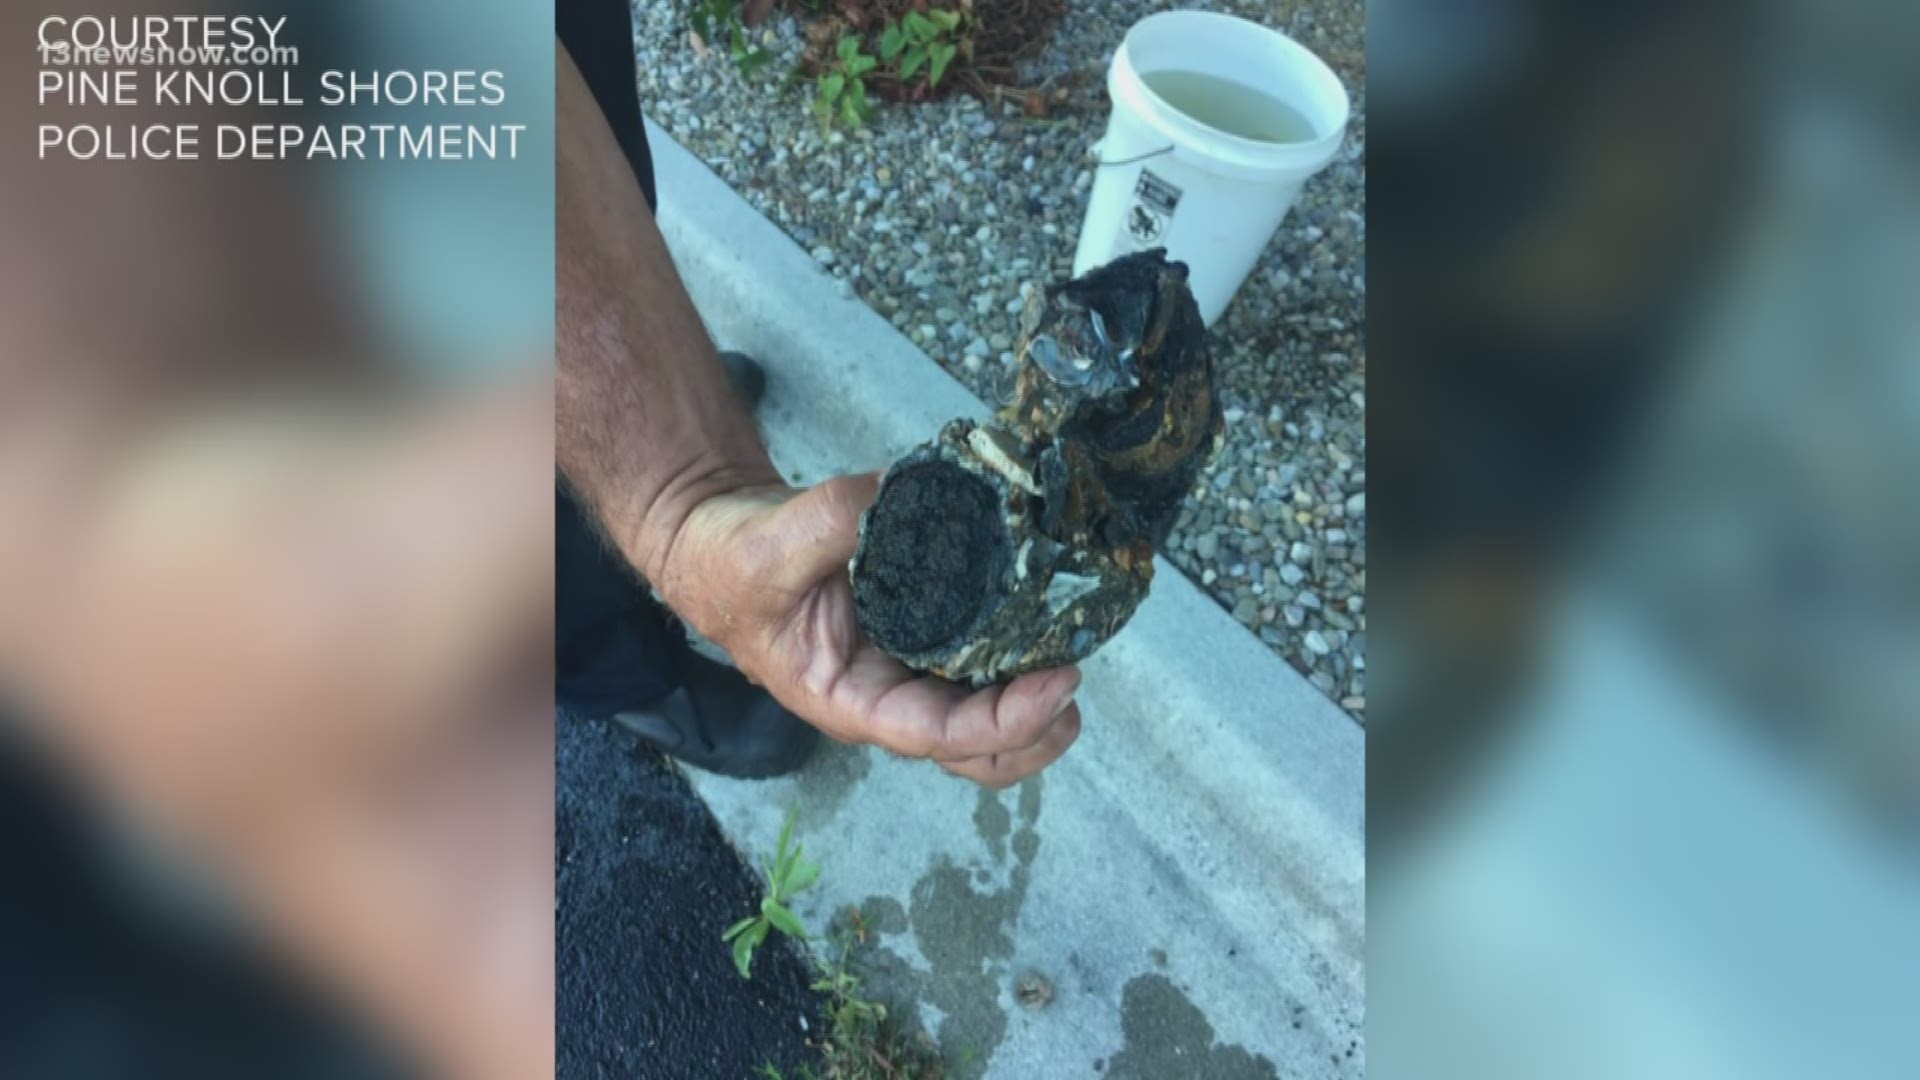 Police in a North Carolina beach town are warning people to be careful after a resident picked up military ordnance from the beach.